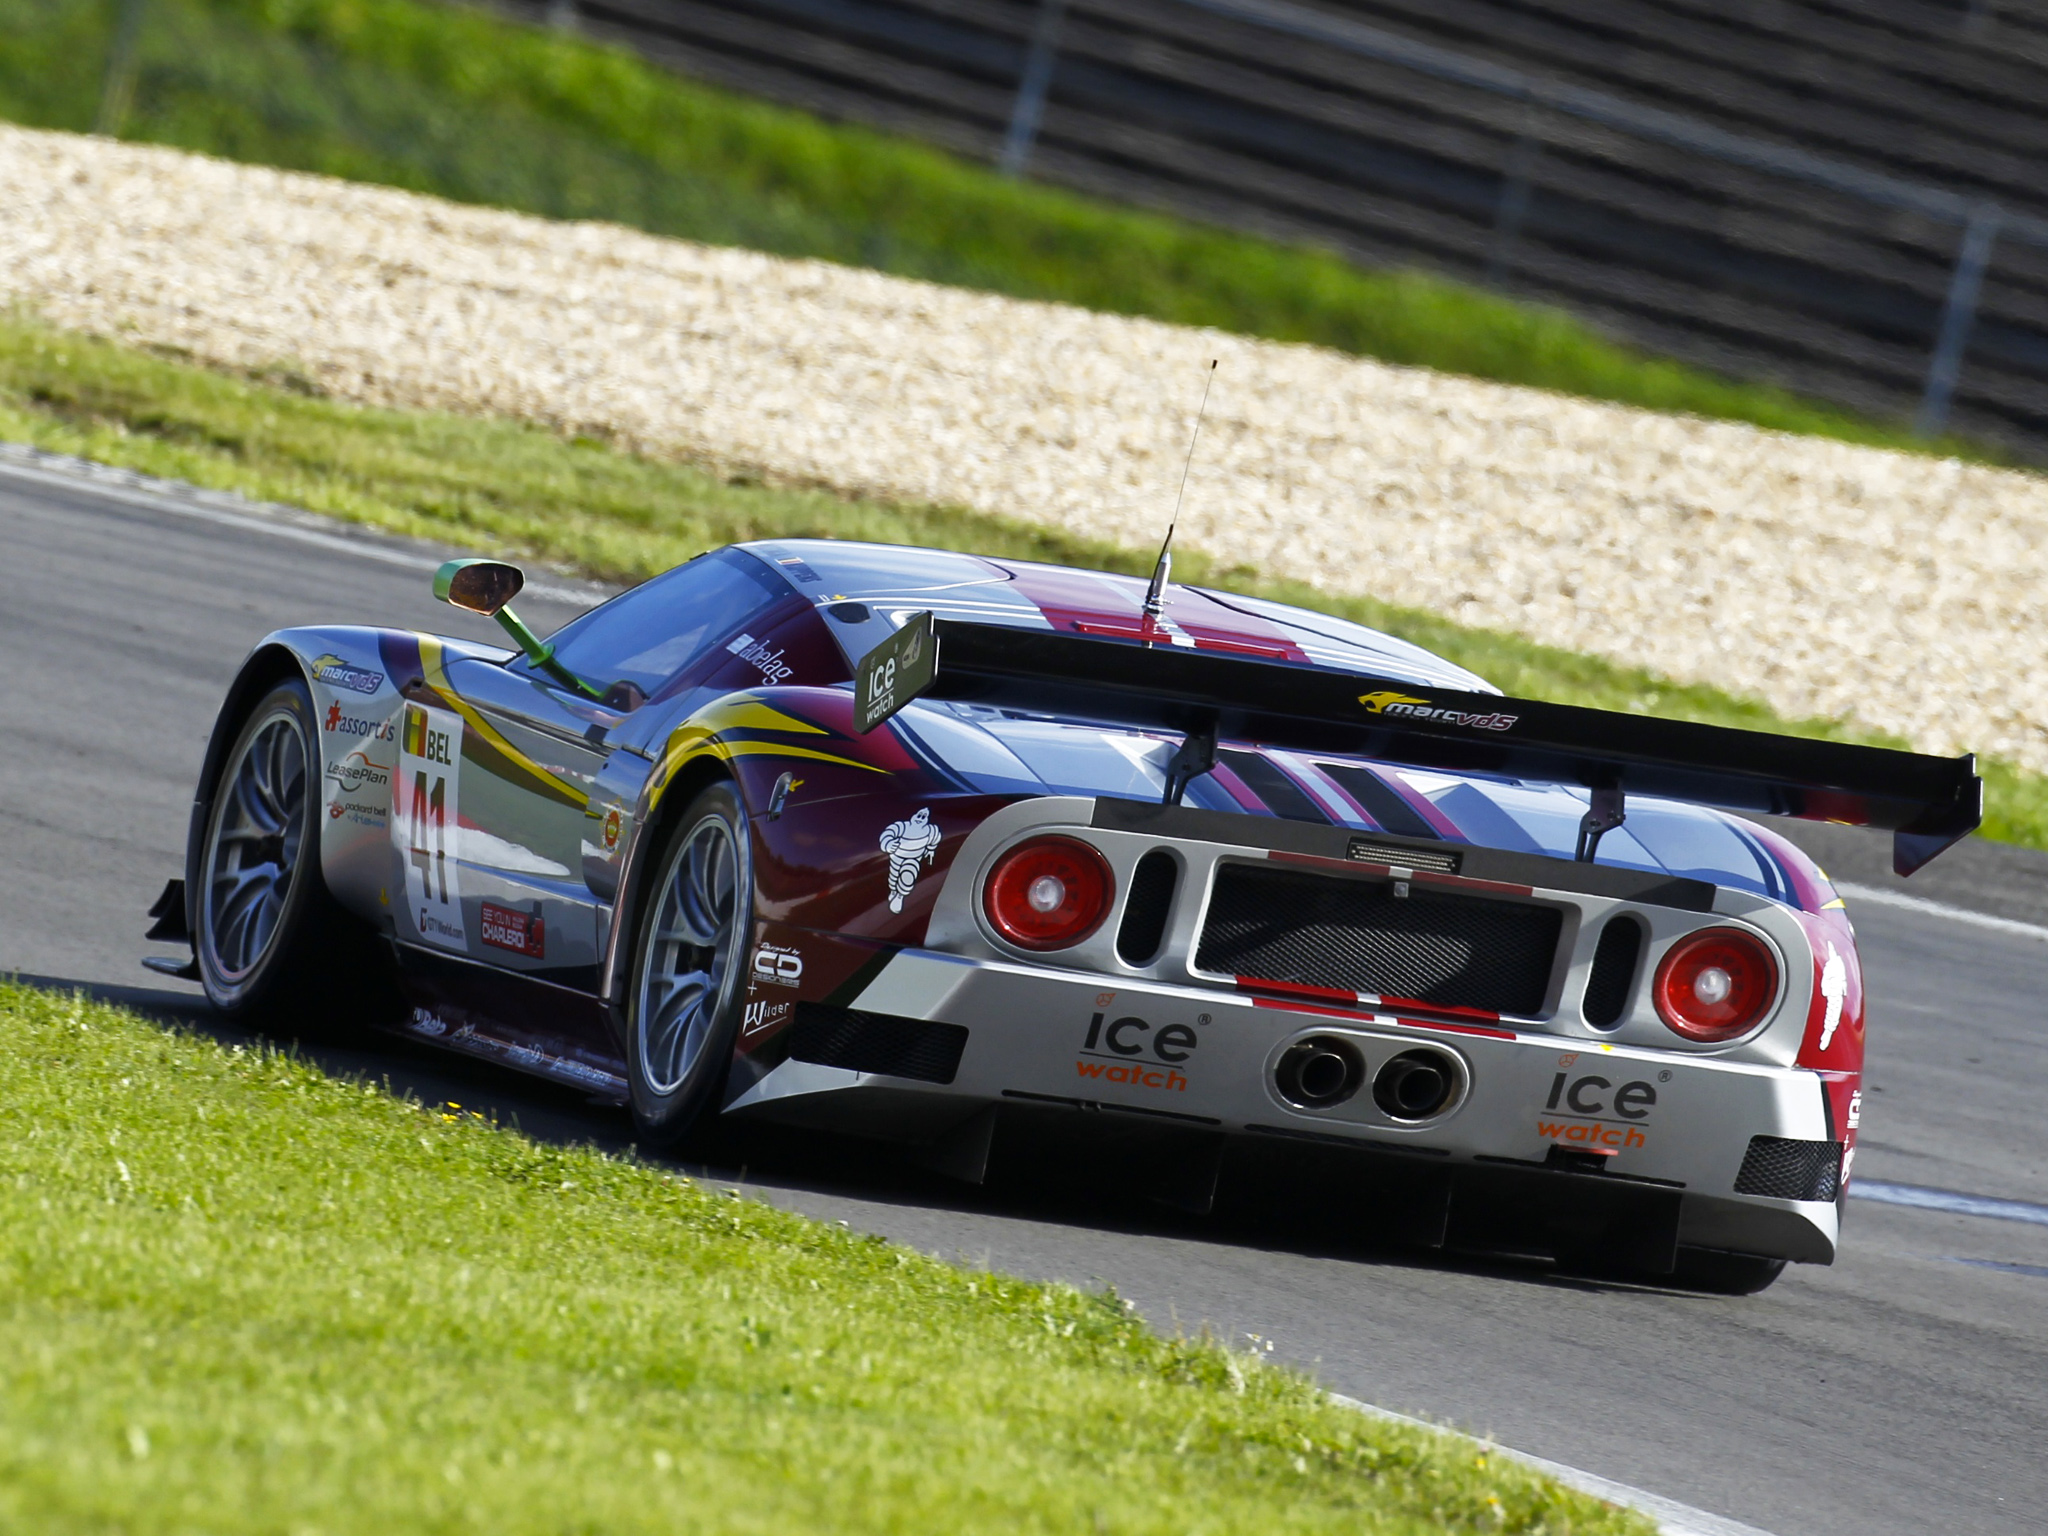 2007, Matech, Racing, Ford, Gt, Supercar, Supercars, Race, Racing, Ford gt, G t, Hf Wallpaper